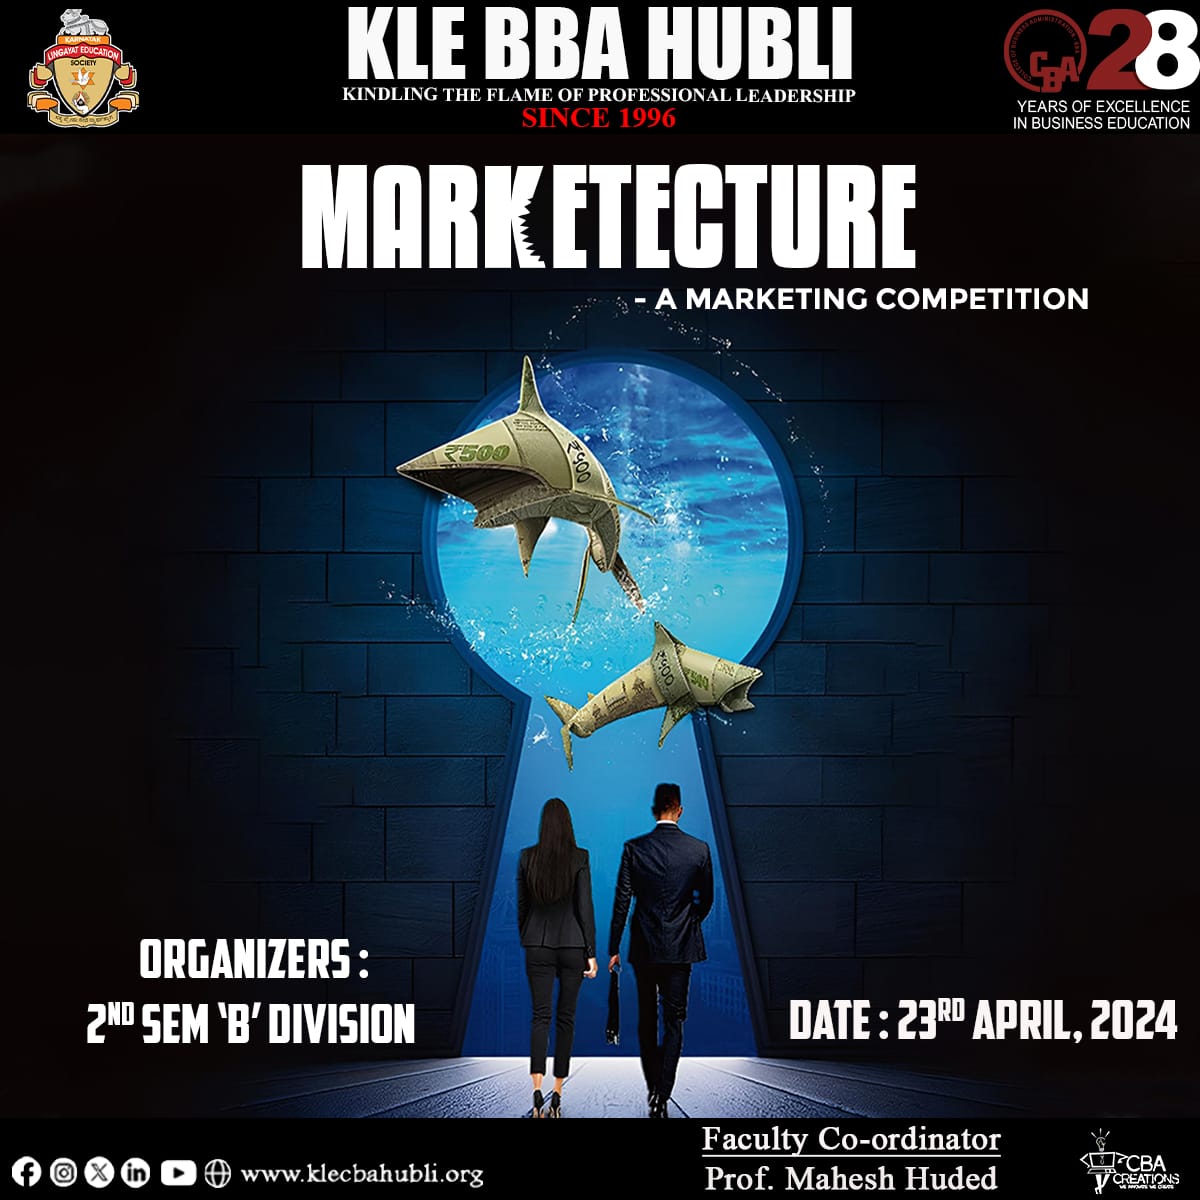 MARKETECTURE - A Marketing Competition. 
An Inter-class competition organised by 2nd Semester B  Division
Students

#28yearsofexcellenceyearsofexcellence #klebbahubballi
#klebbahubli#topbbacollegeinhubli
#bestmanagementschools #bbalife#hublicolleges